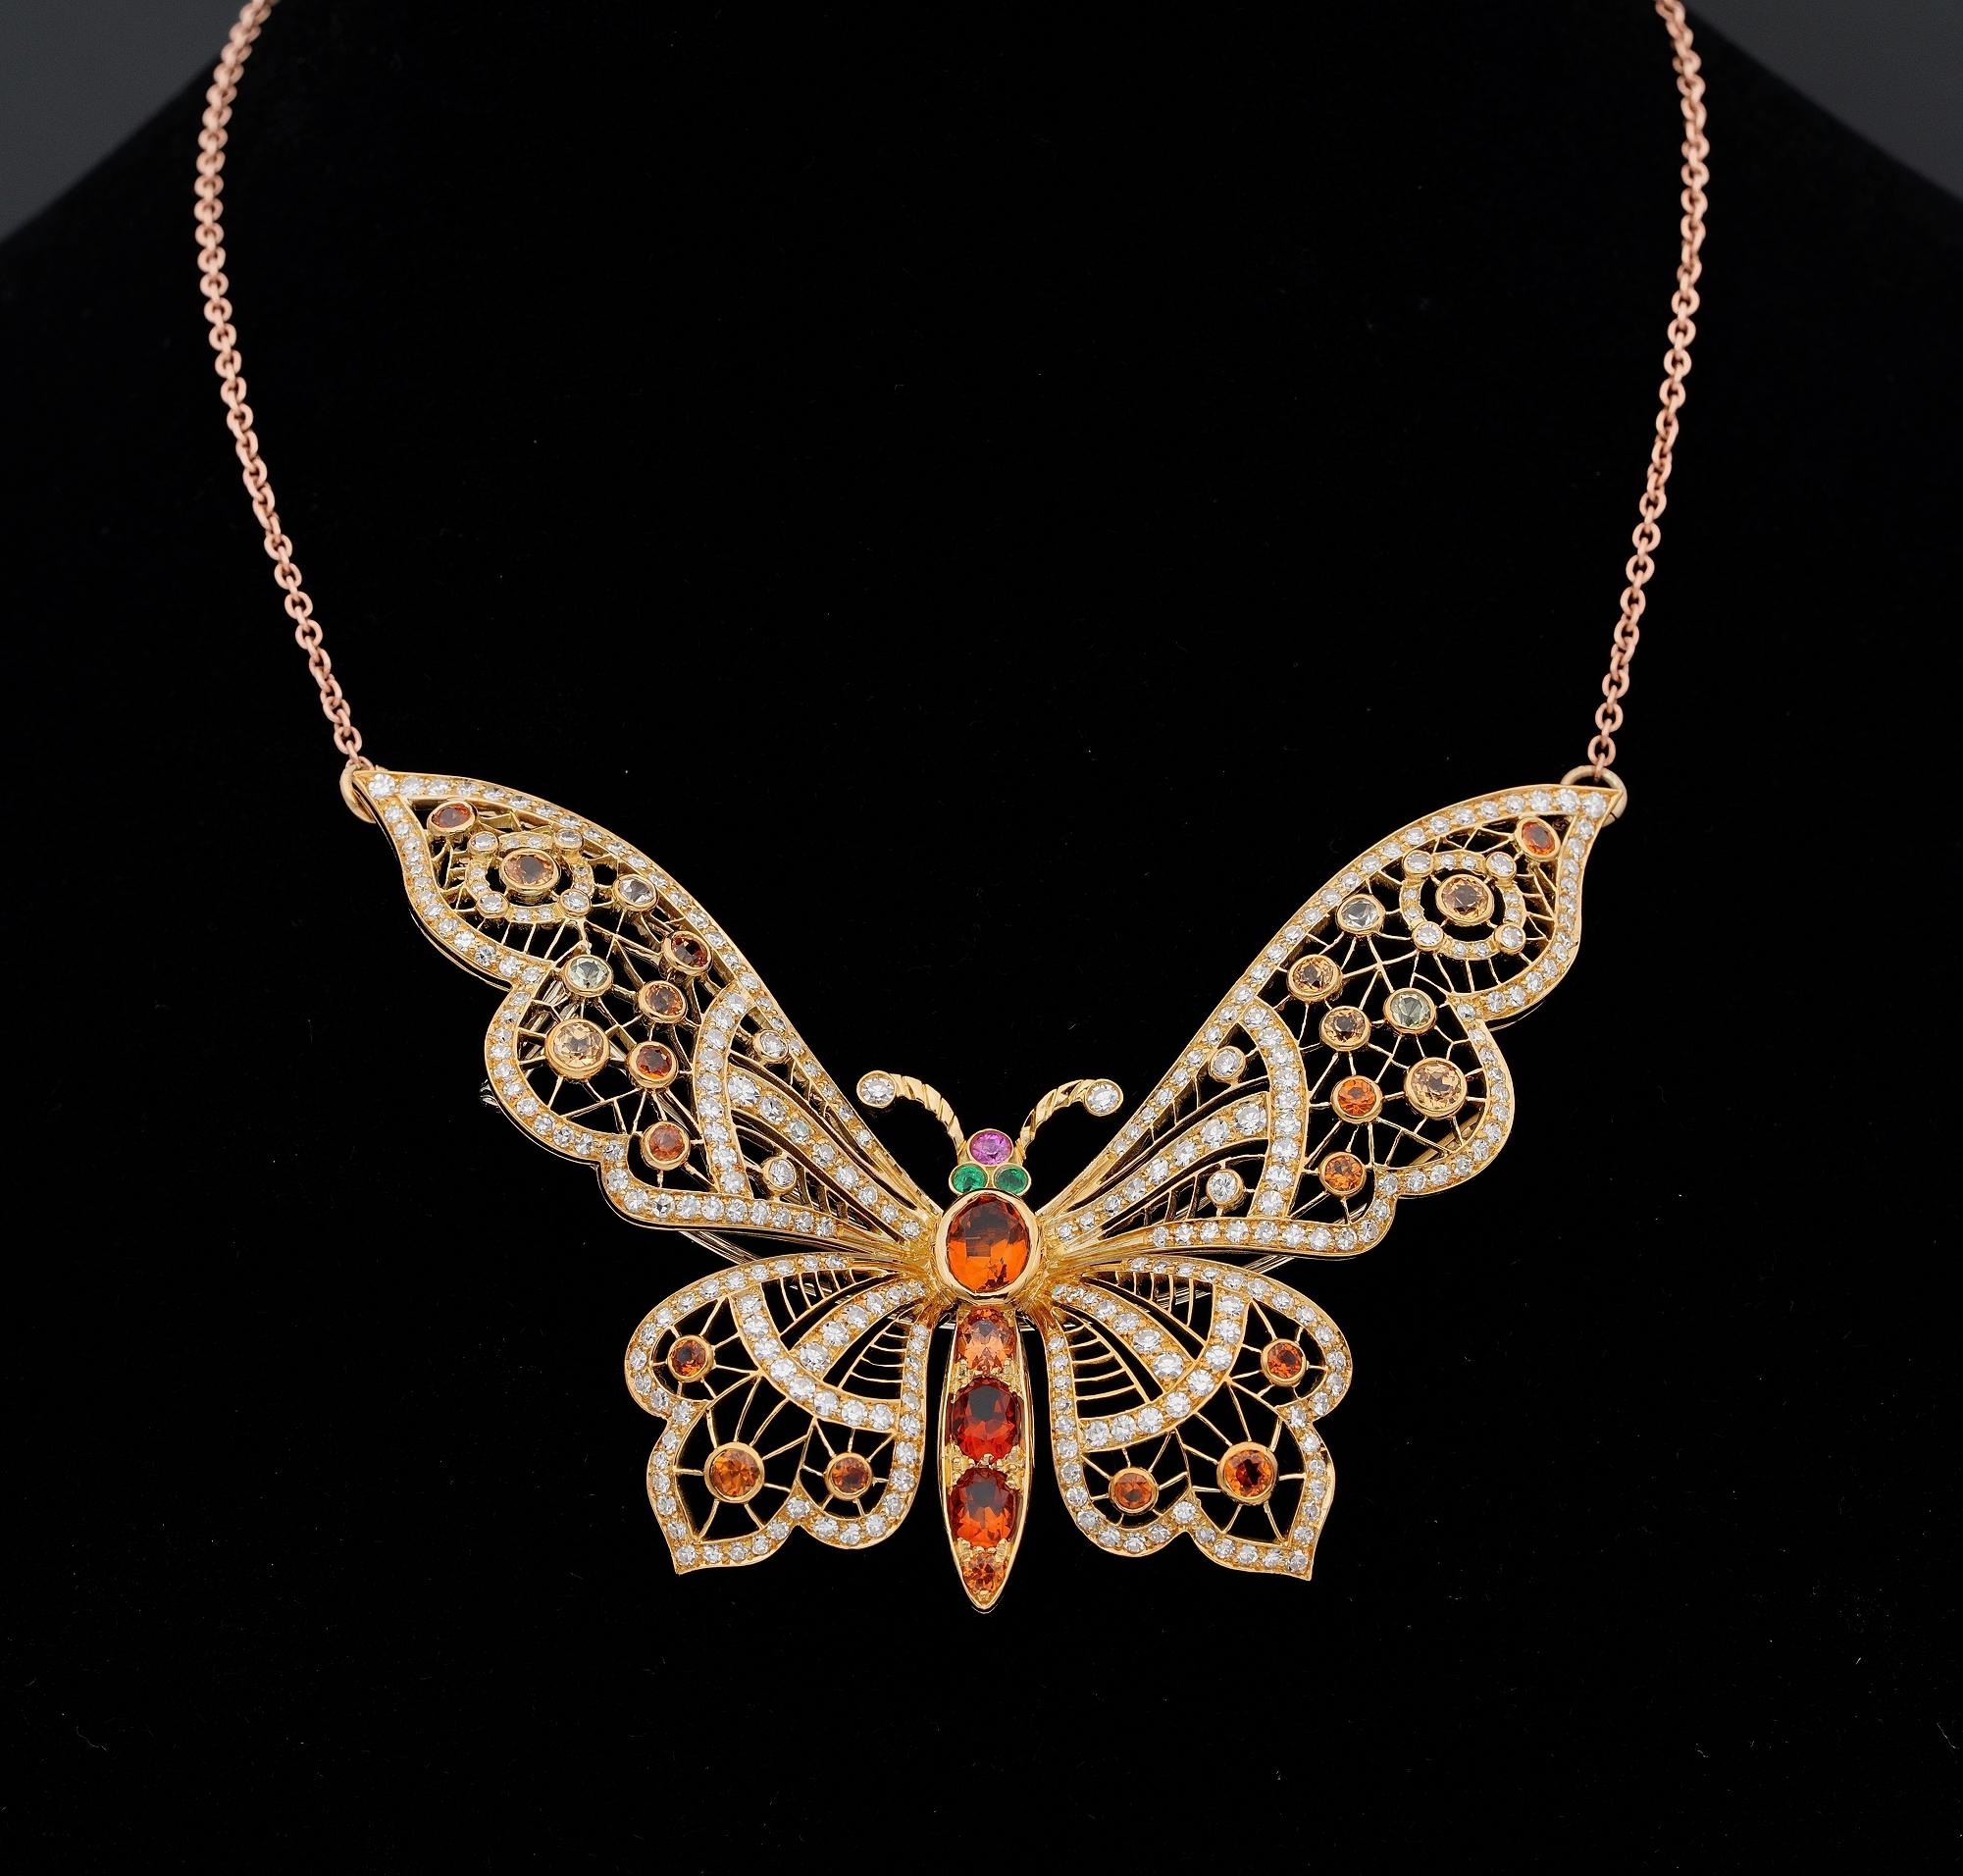 Wearable Grace & Beauty

Symbolic of metamorphosis, spiritual rebirth, creativity, potential, joy, change, ascension and ability to experience the wonders of life
Butterflies are one of the most magical and cherished creatures recreated in jewellery